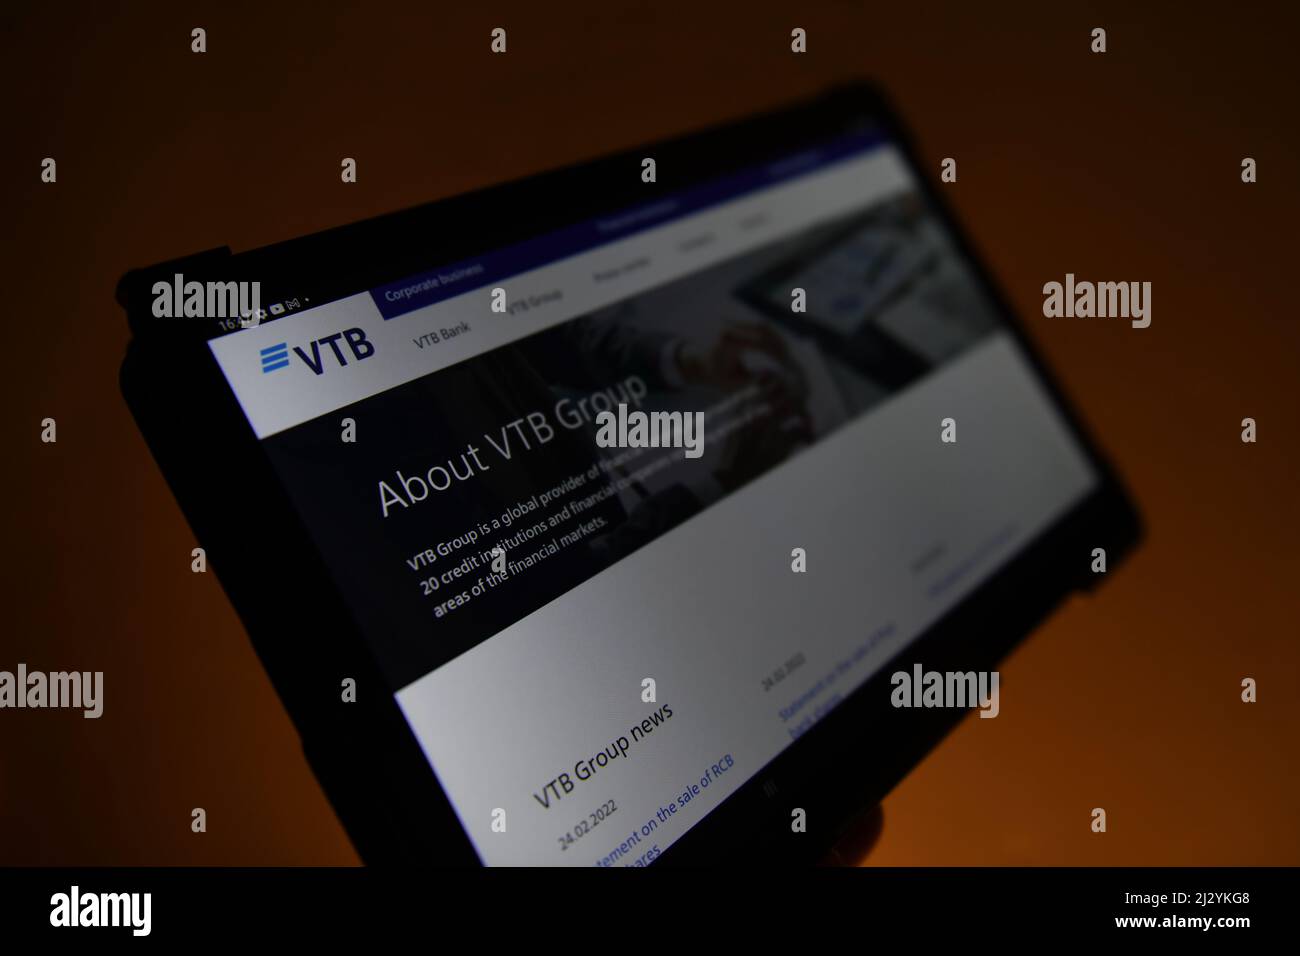 The VTB Bank website seen on a tablet. Stock Photo